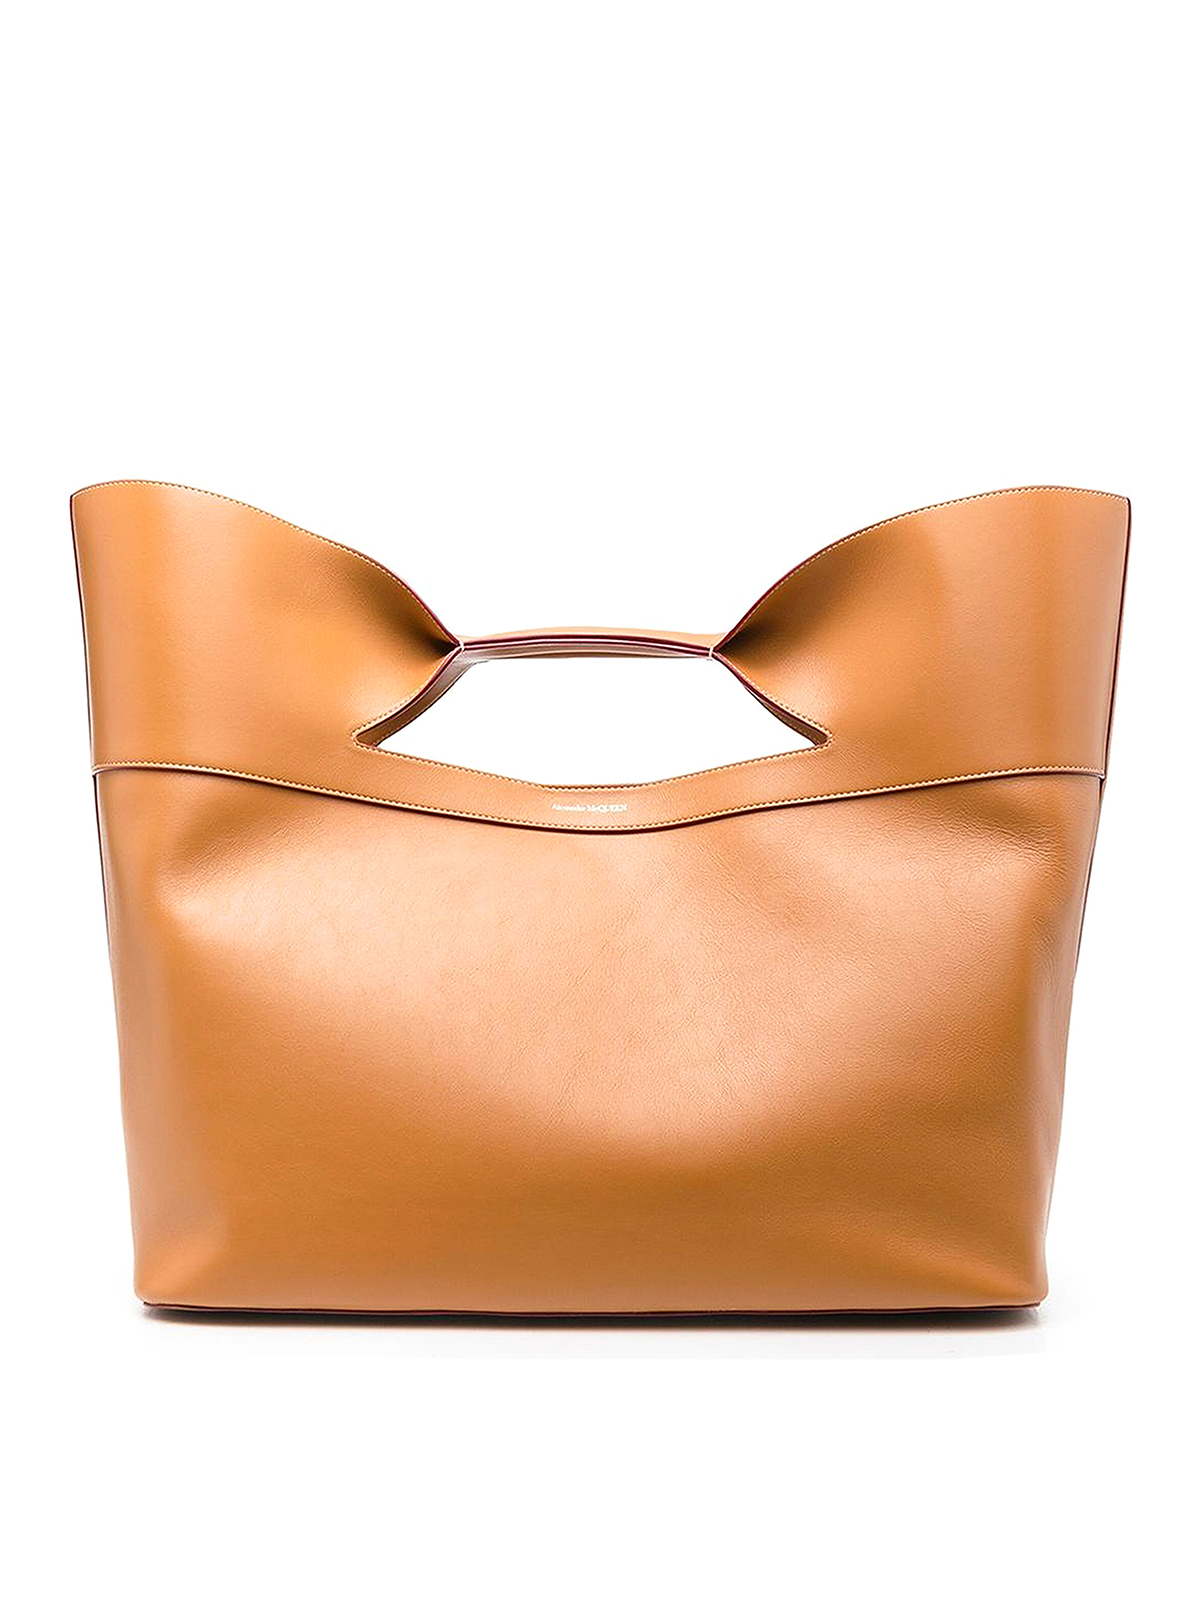 Alexander Mcqueen The Bow Leather Tote Bag In Brown